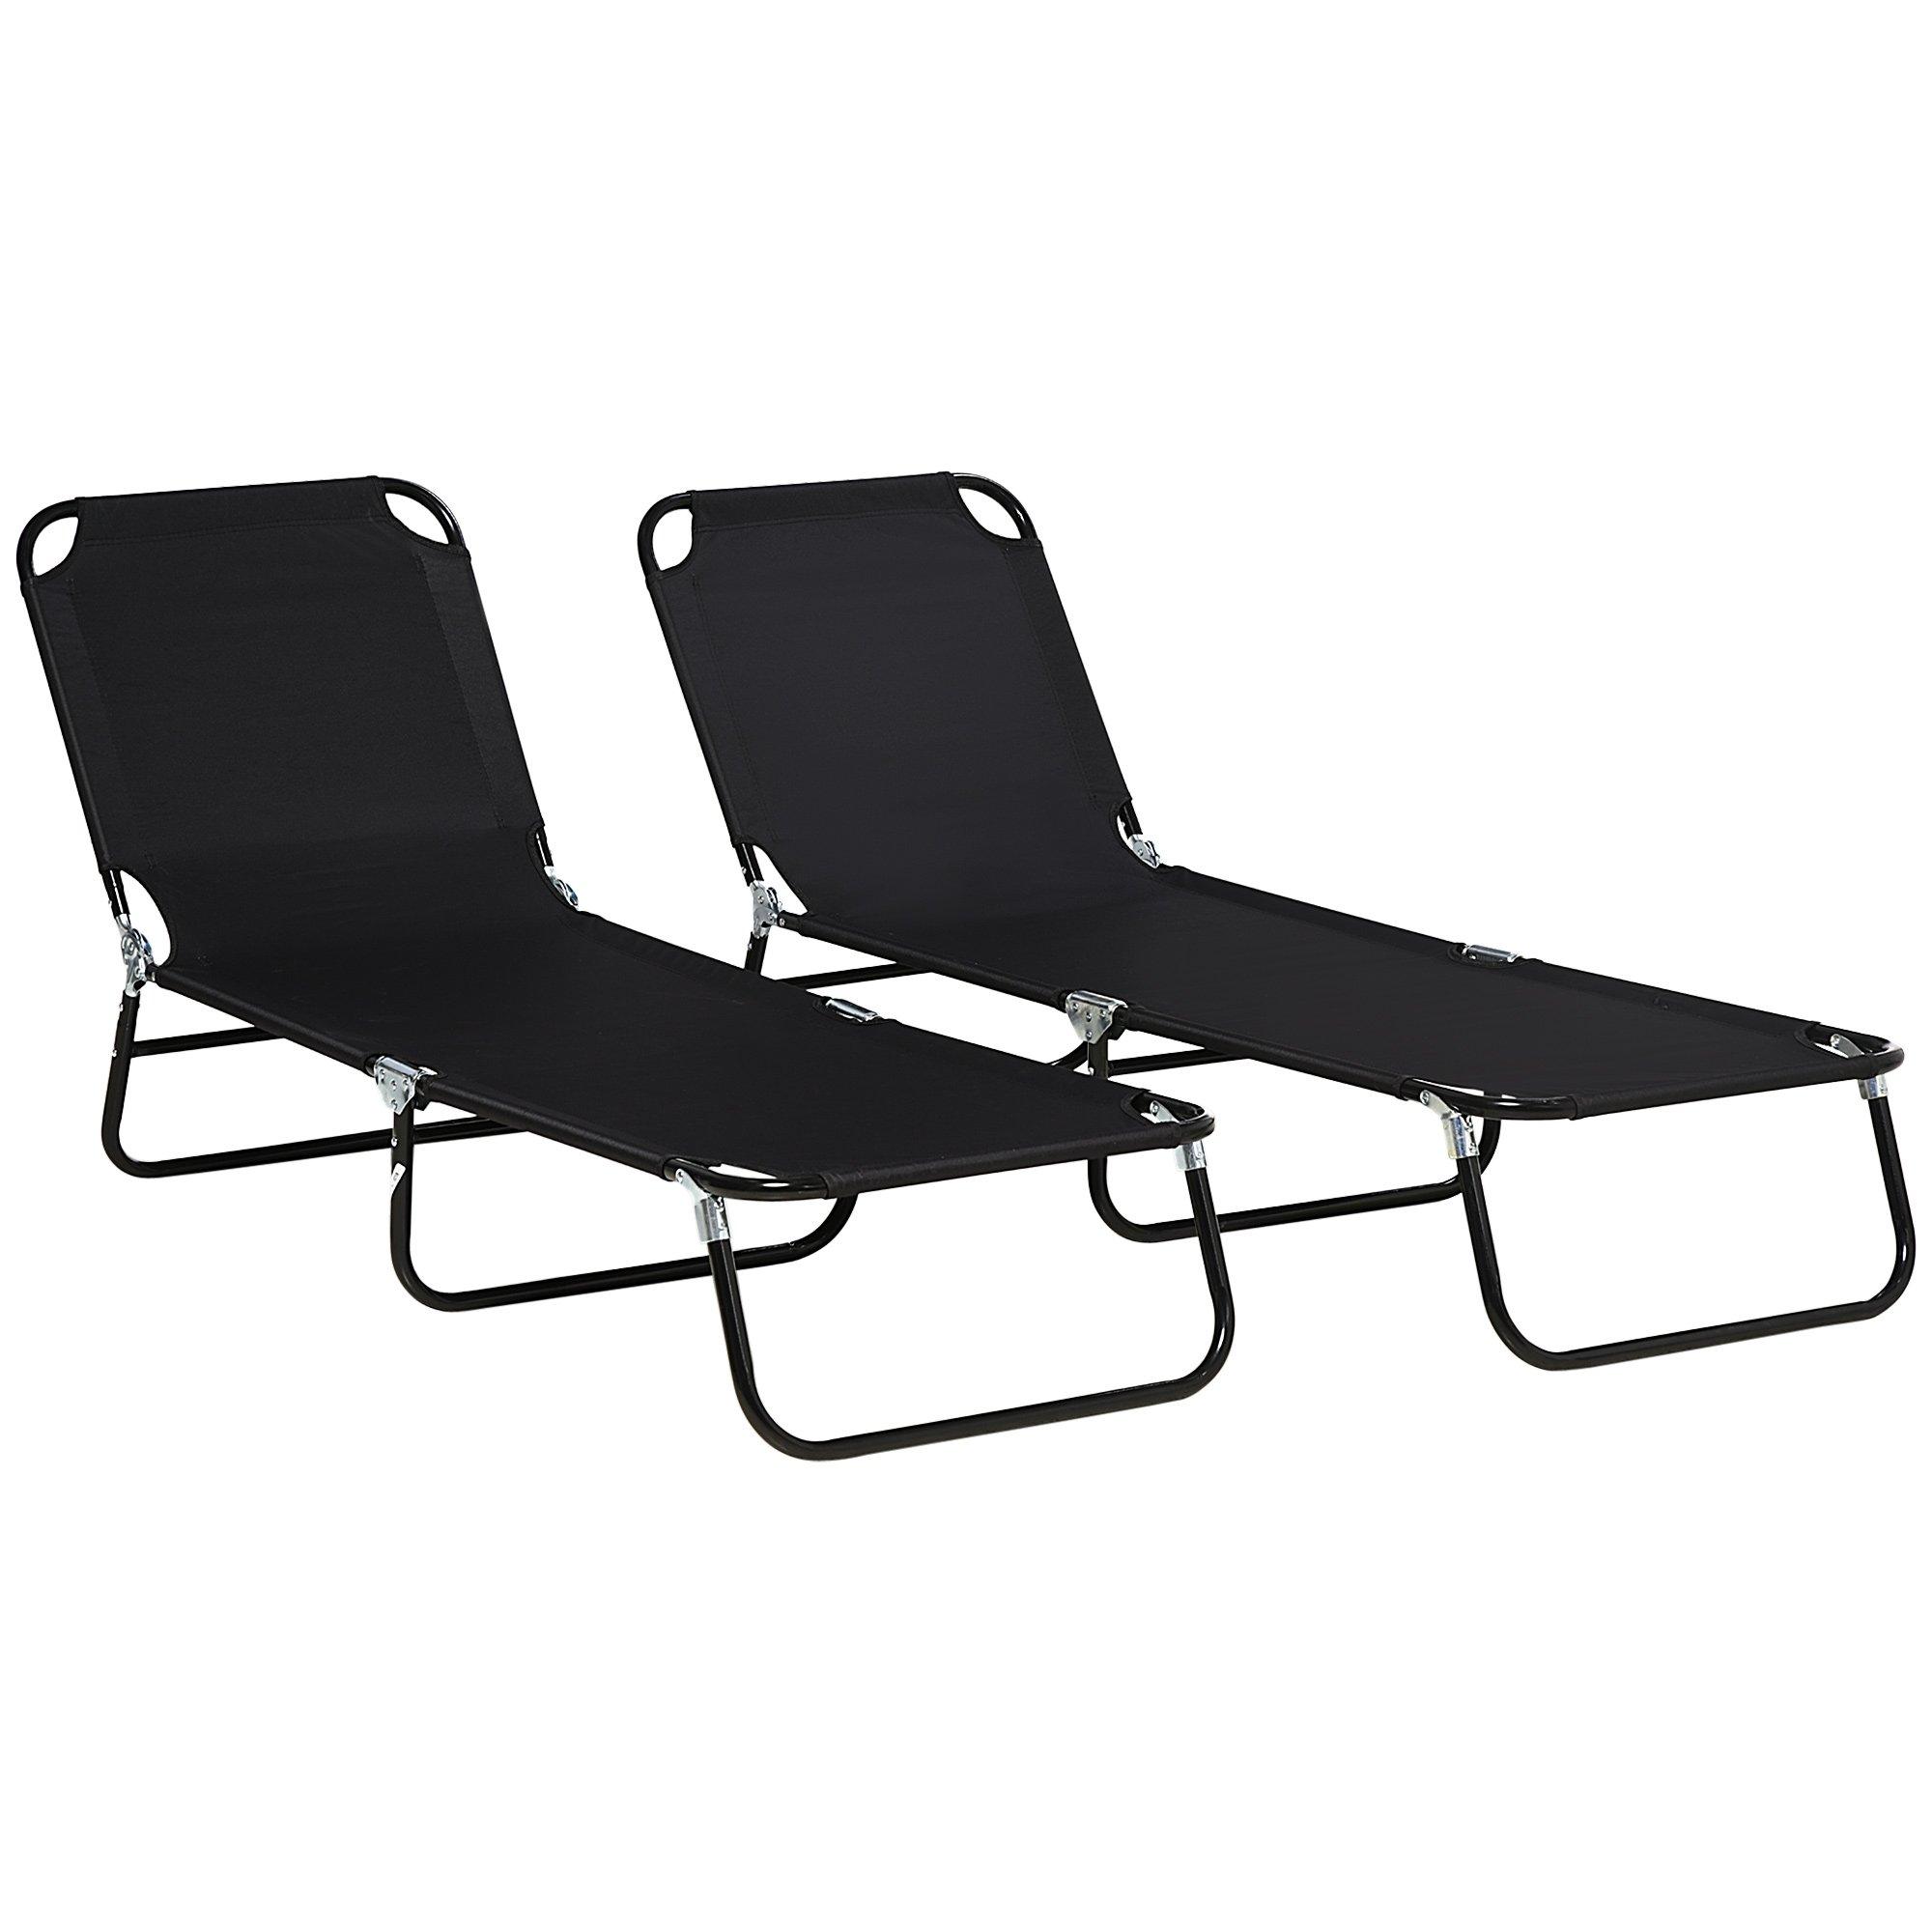 Folding Sun Loungers Set of 2 Outdoor Day Bed with Adjustable Backrest